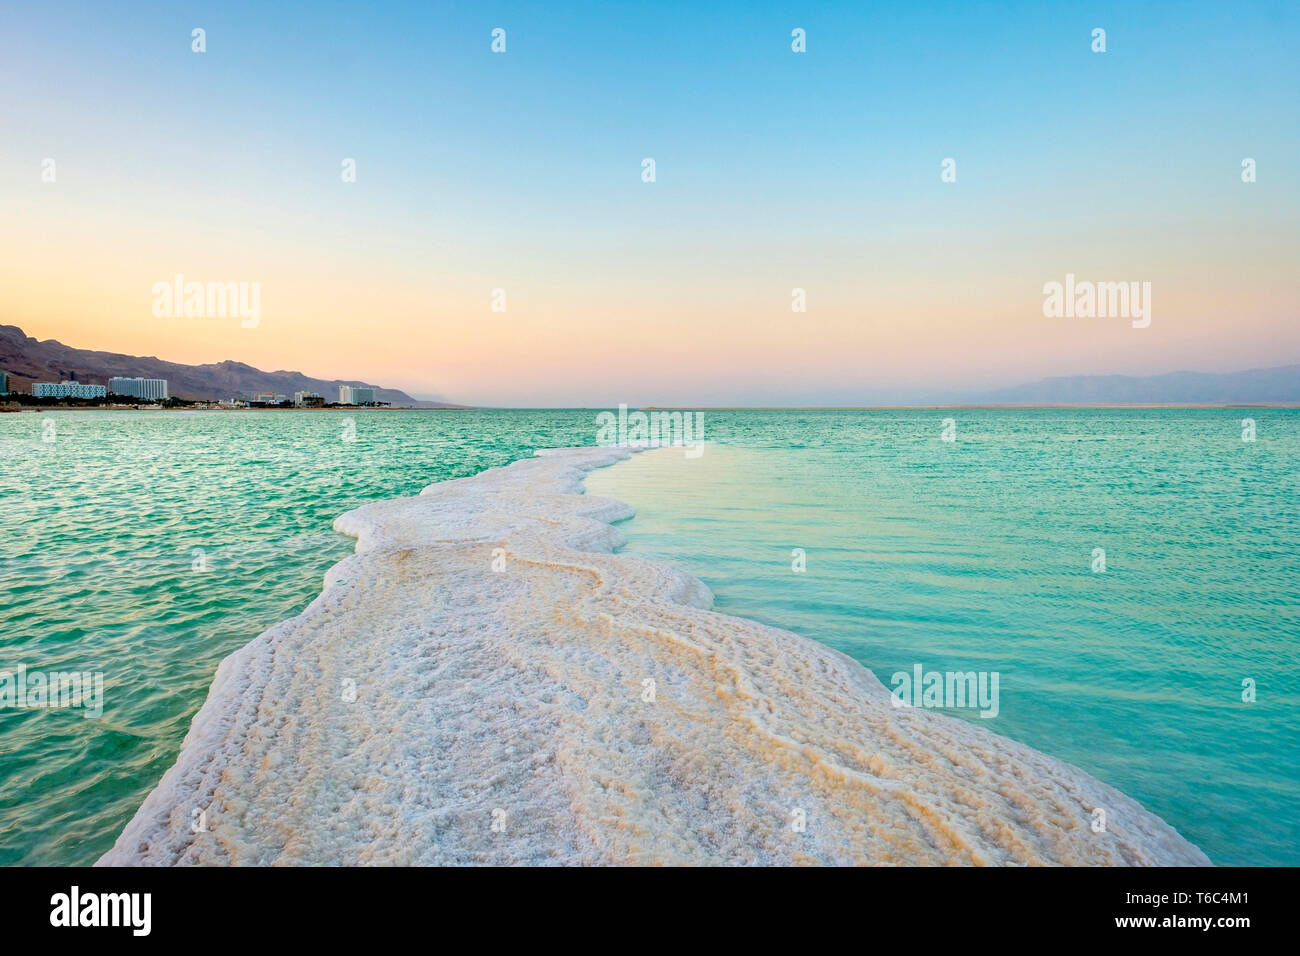 Israel, South District, Ein Bokek. Salt formations on the Dead Sea at sunset. Stock Photo